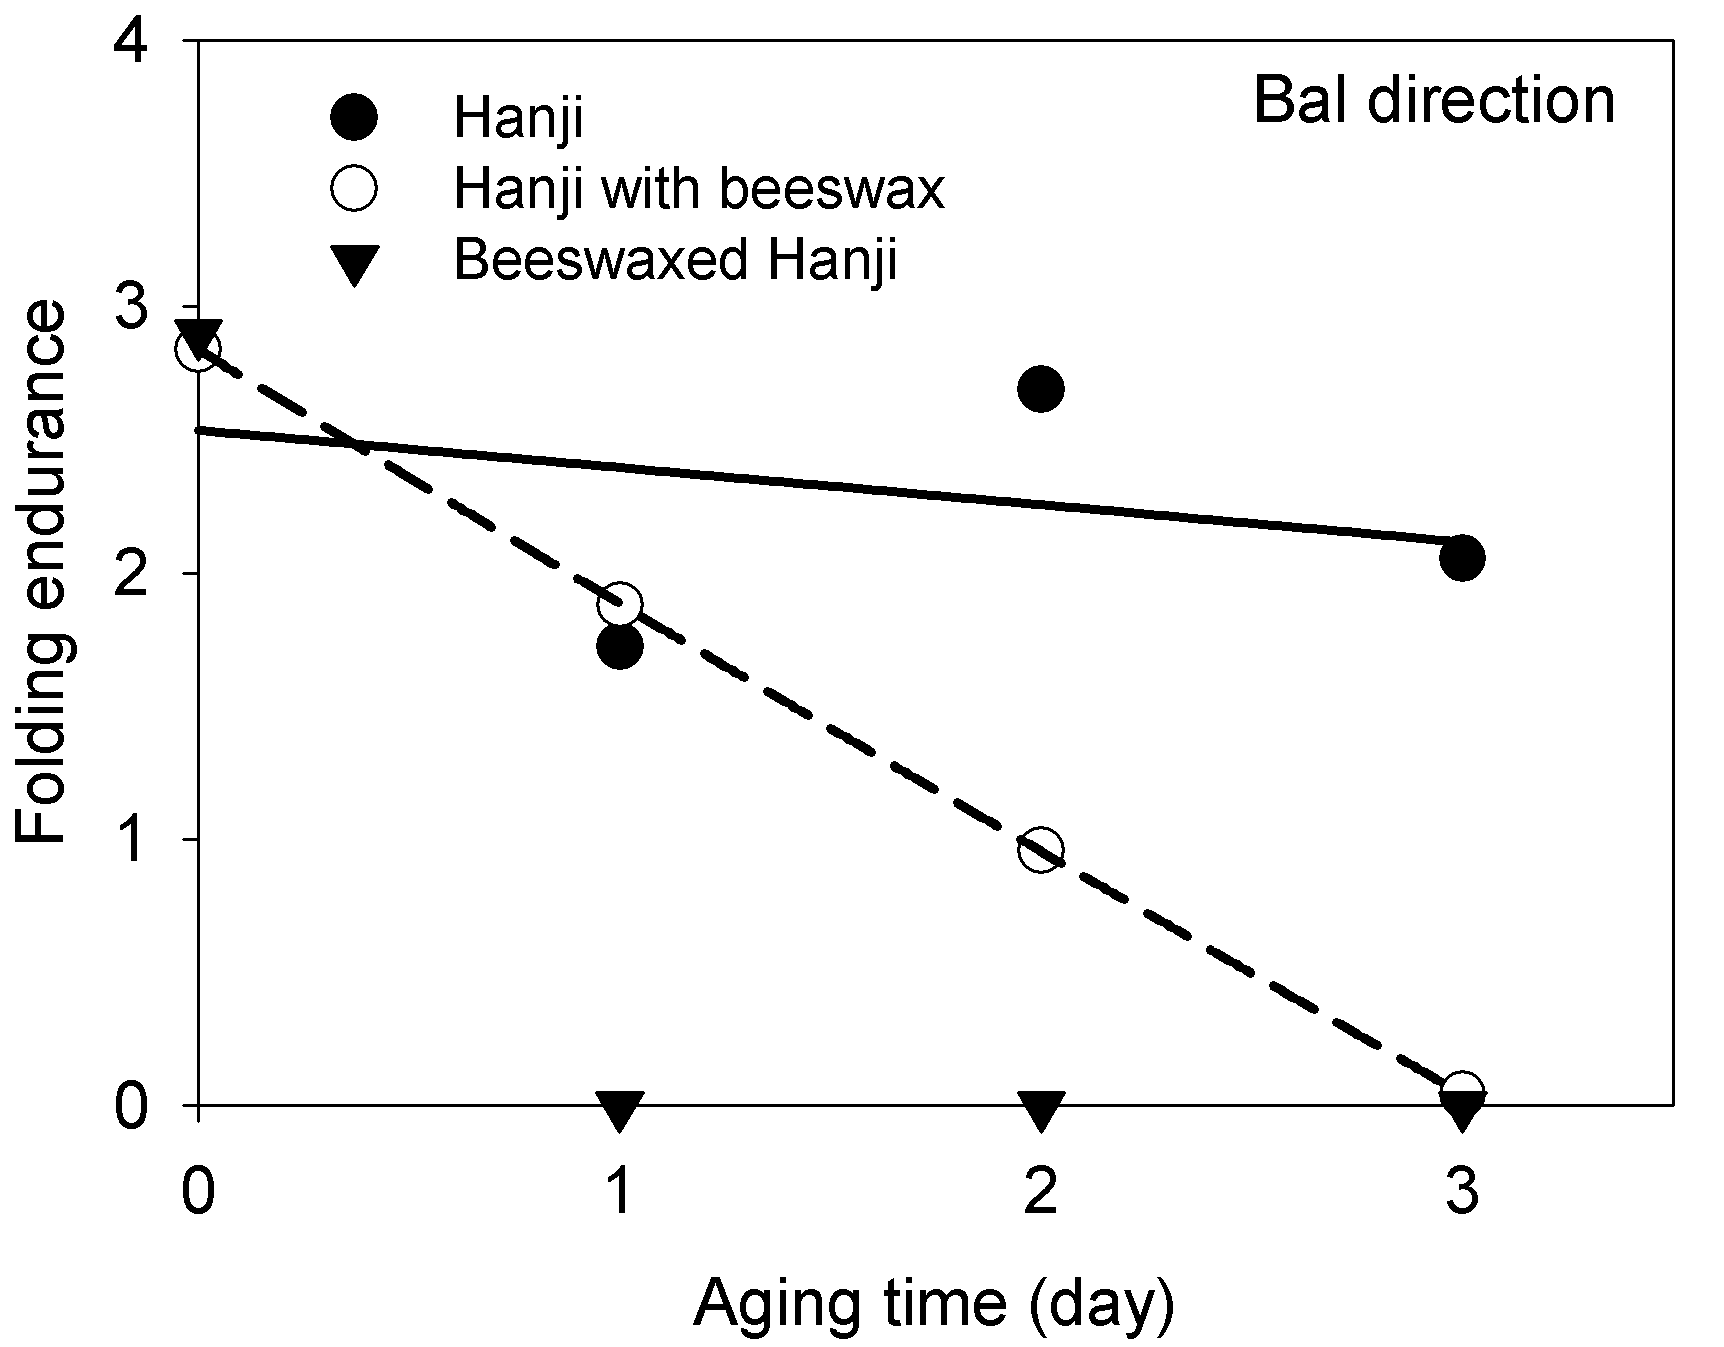 Effect of dry heat aging at 150℃ on folding endurance of Hanji, Hanji with beeswax and beeswax-treated Hanji in bal direction.